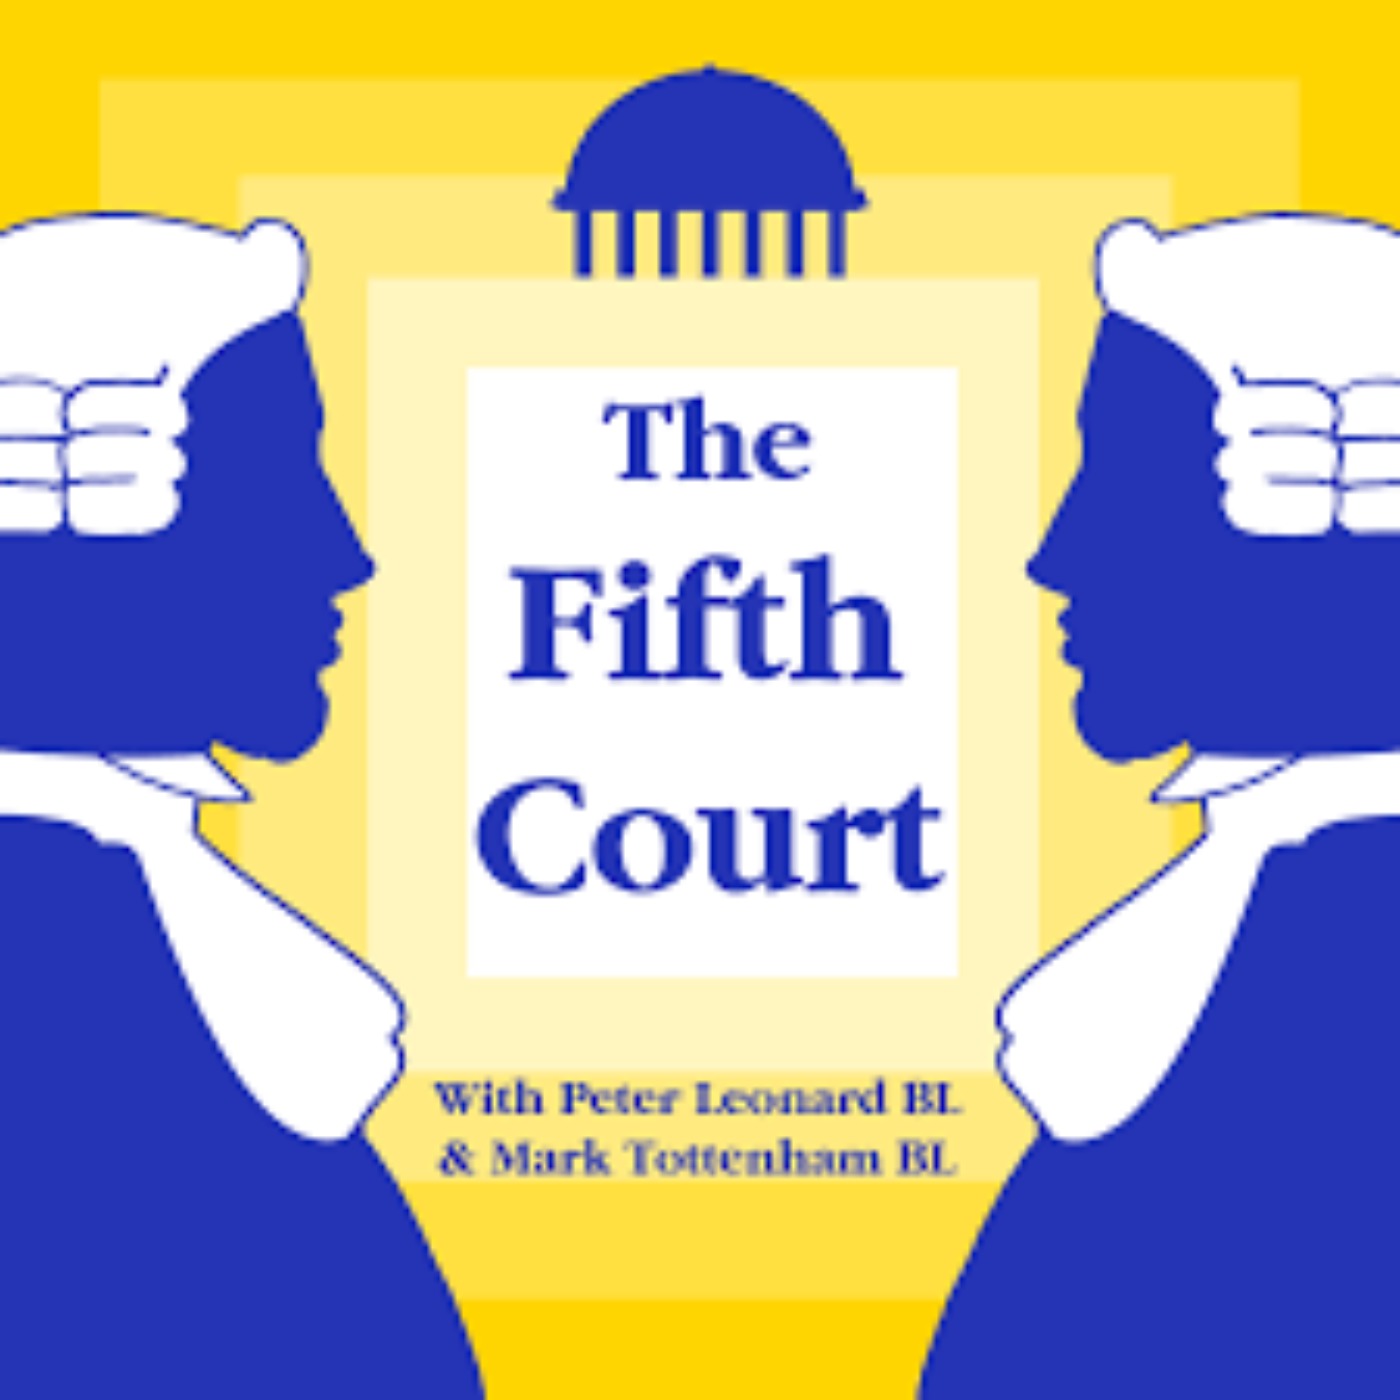 E74 The Fifth Court - Cynthia Ní Mhurchú BL - Europe, Eurovision and legal life after RTE